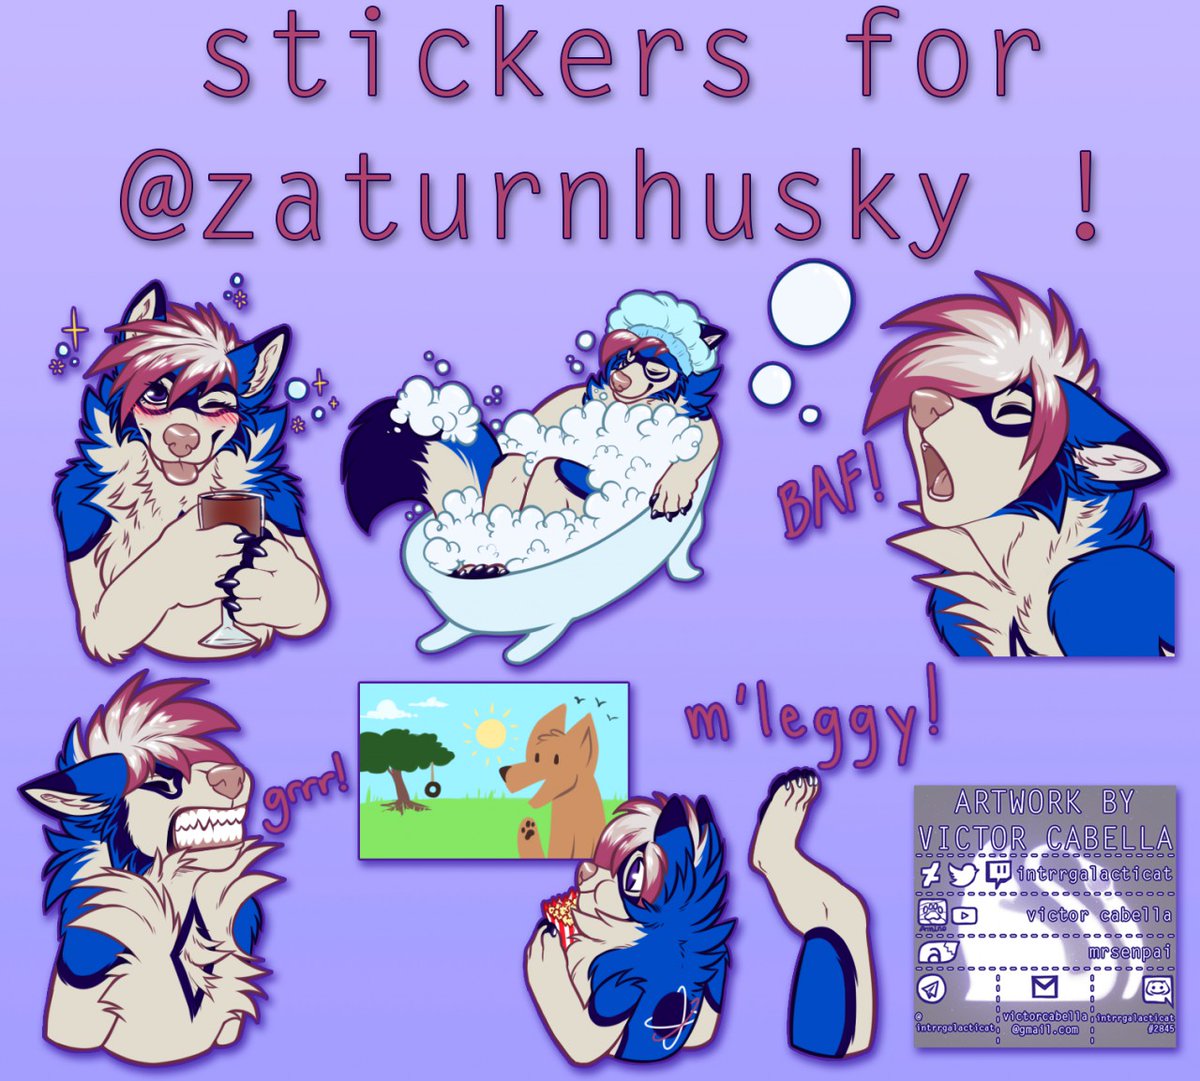 ill start off with @/cactimutt 's post abt theft. alongside their stickers, there are ones i had created via private commission for telegram stickers. all comms of mine are for personal use only unless they pay for art rights. theyve been selling my art for merch, no discussion.